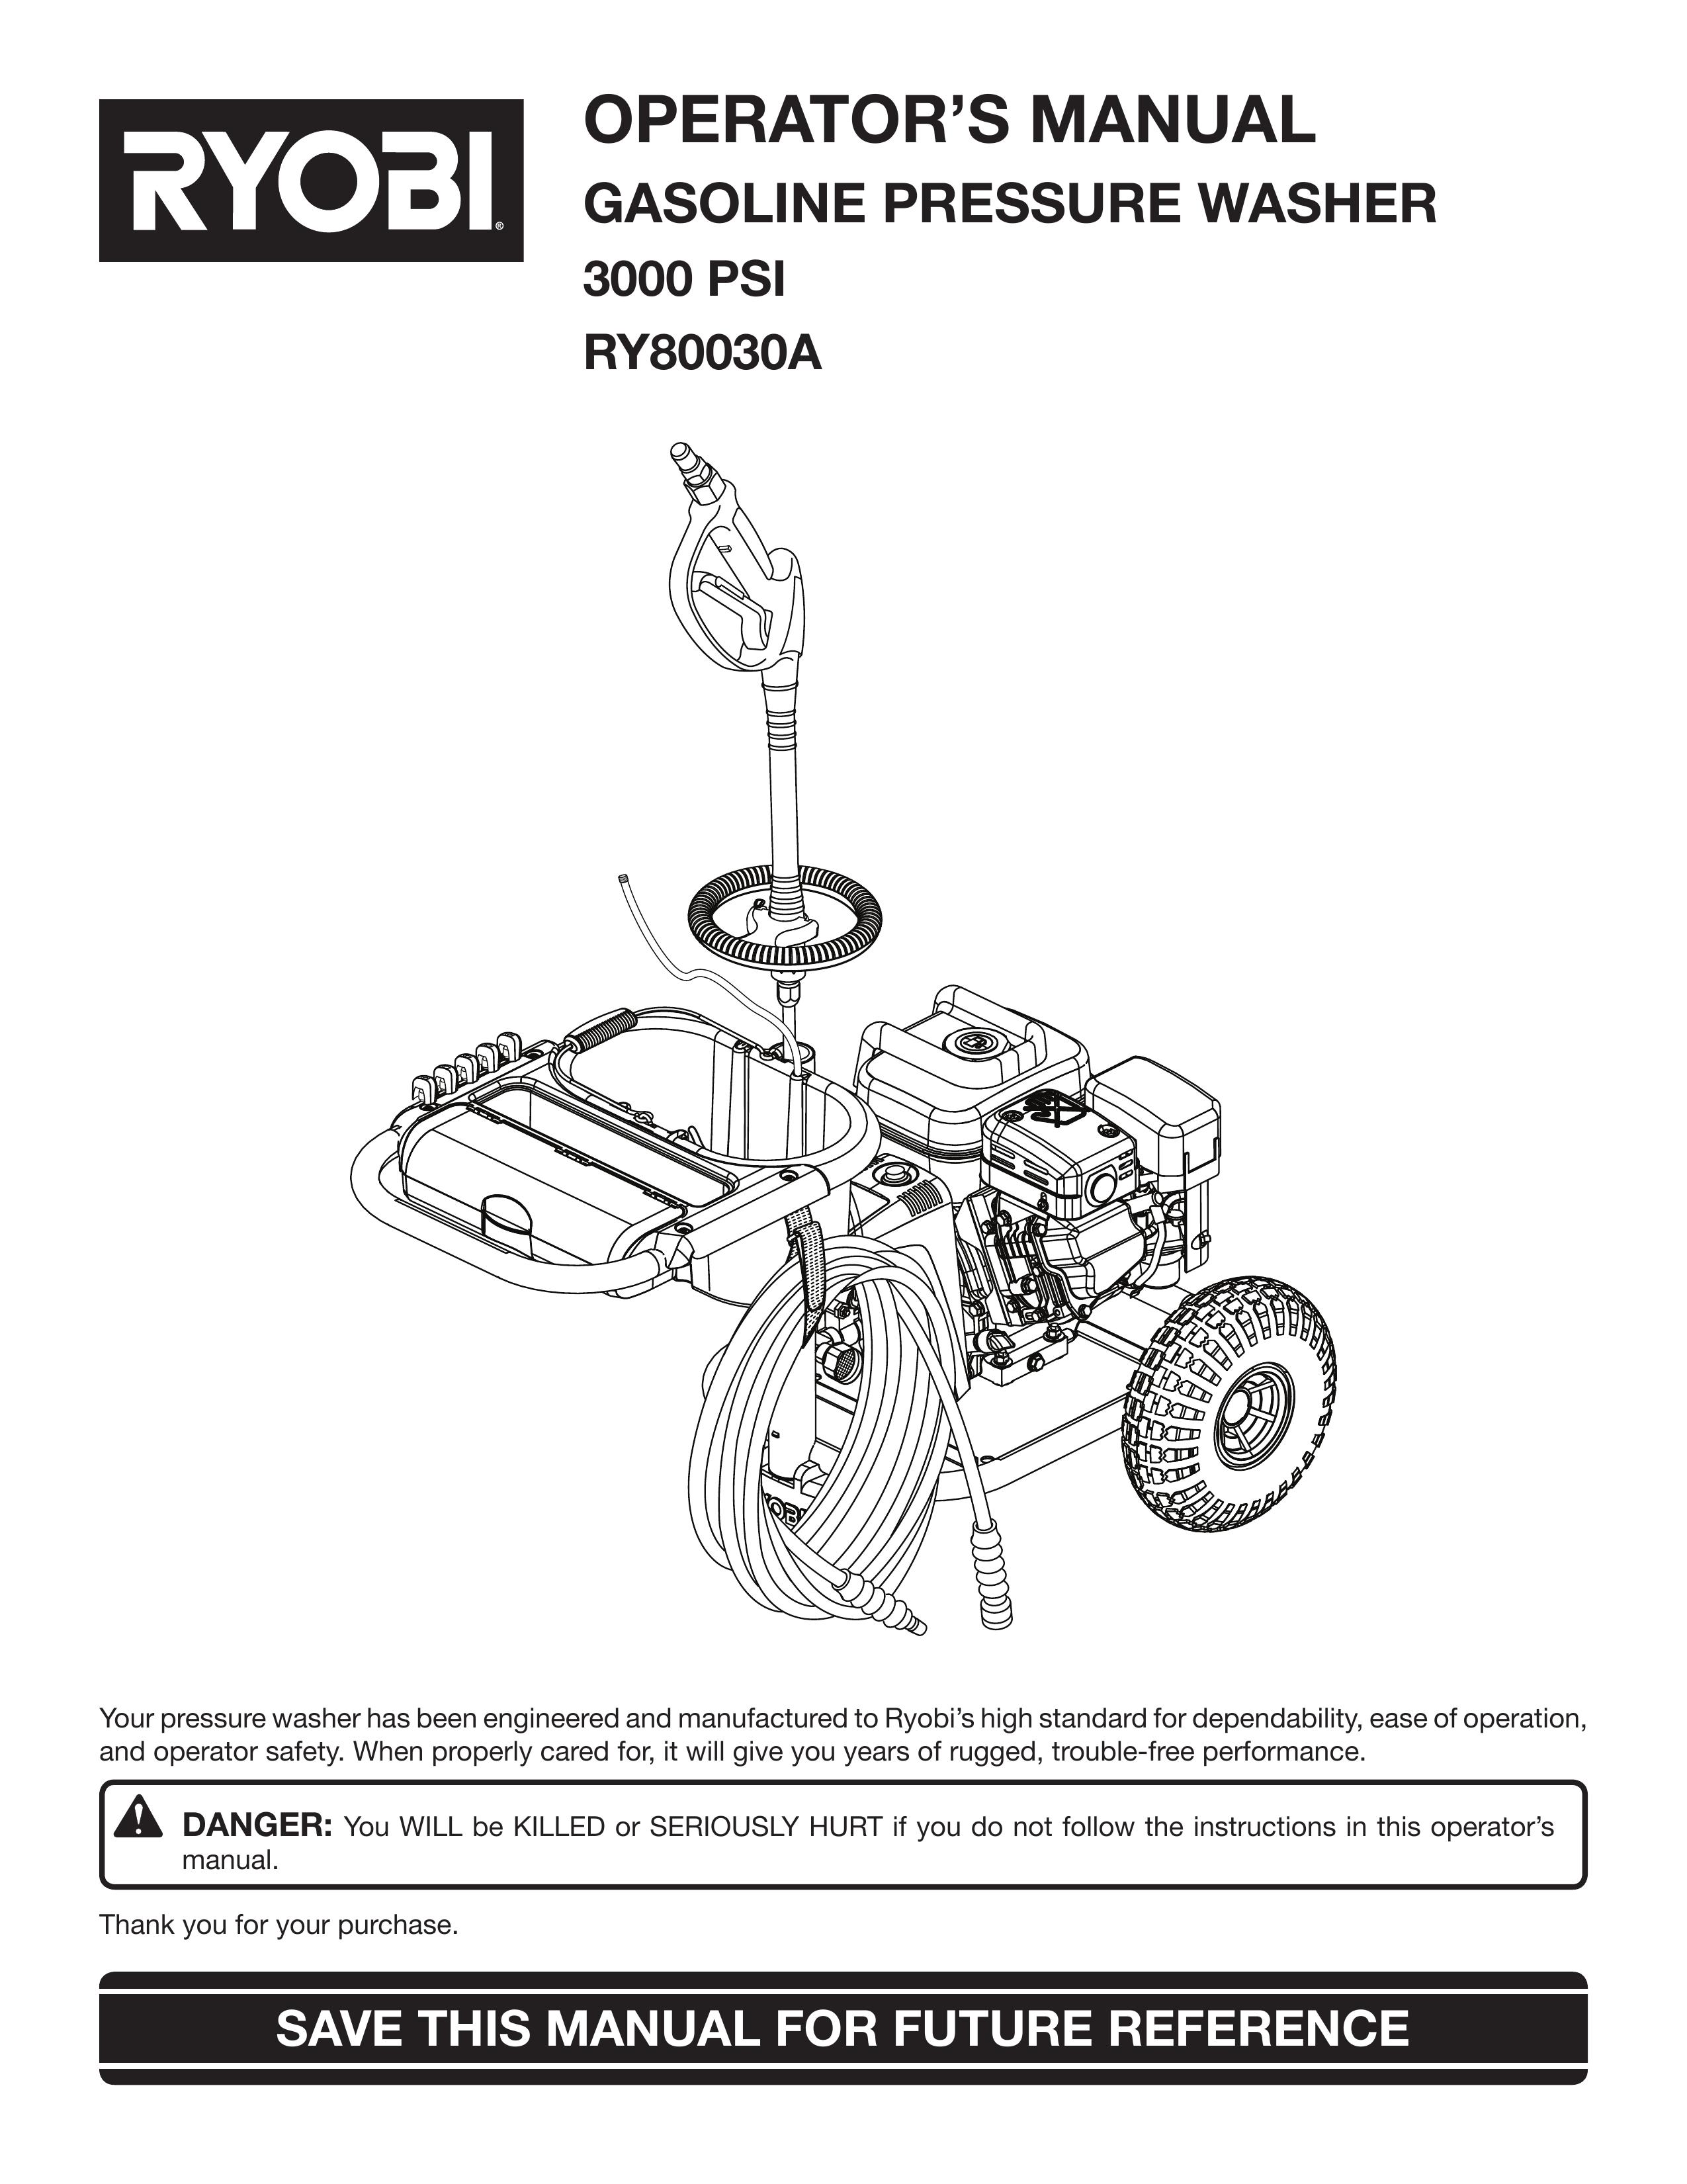 Ryobi Outdoor 3000 PSI, RY80030A Pressure Washer User Manual